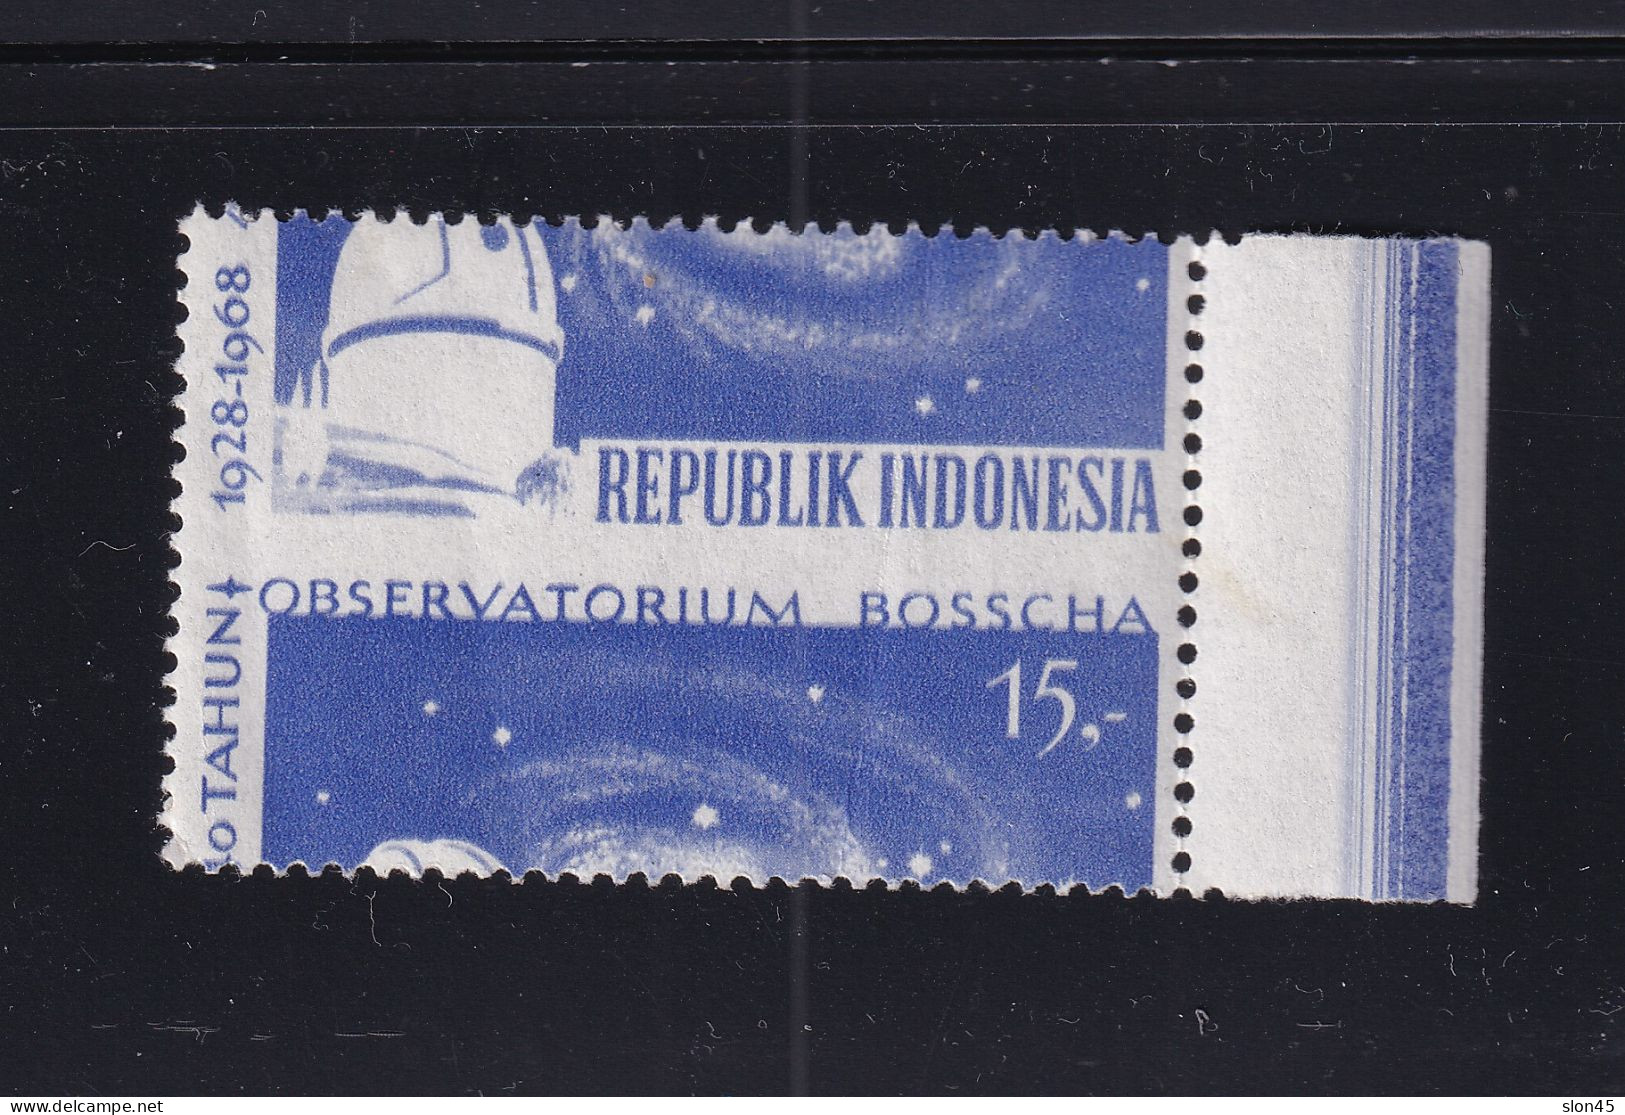 Indonesia 1968 Yellow Color Missing Misperf Error MNH 15451 - Erreurs Sur Timbres